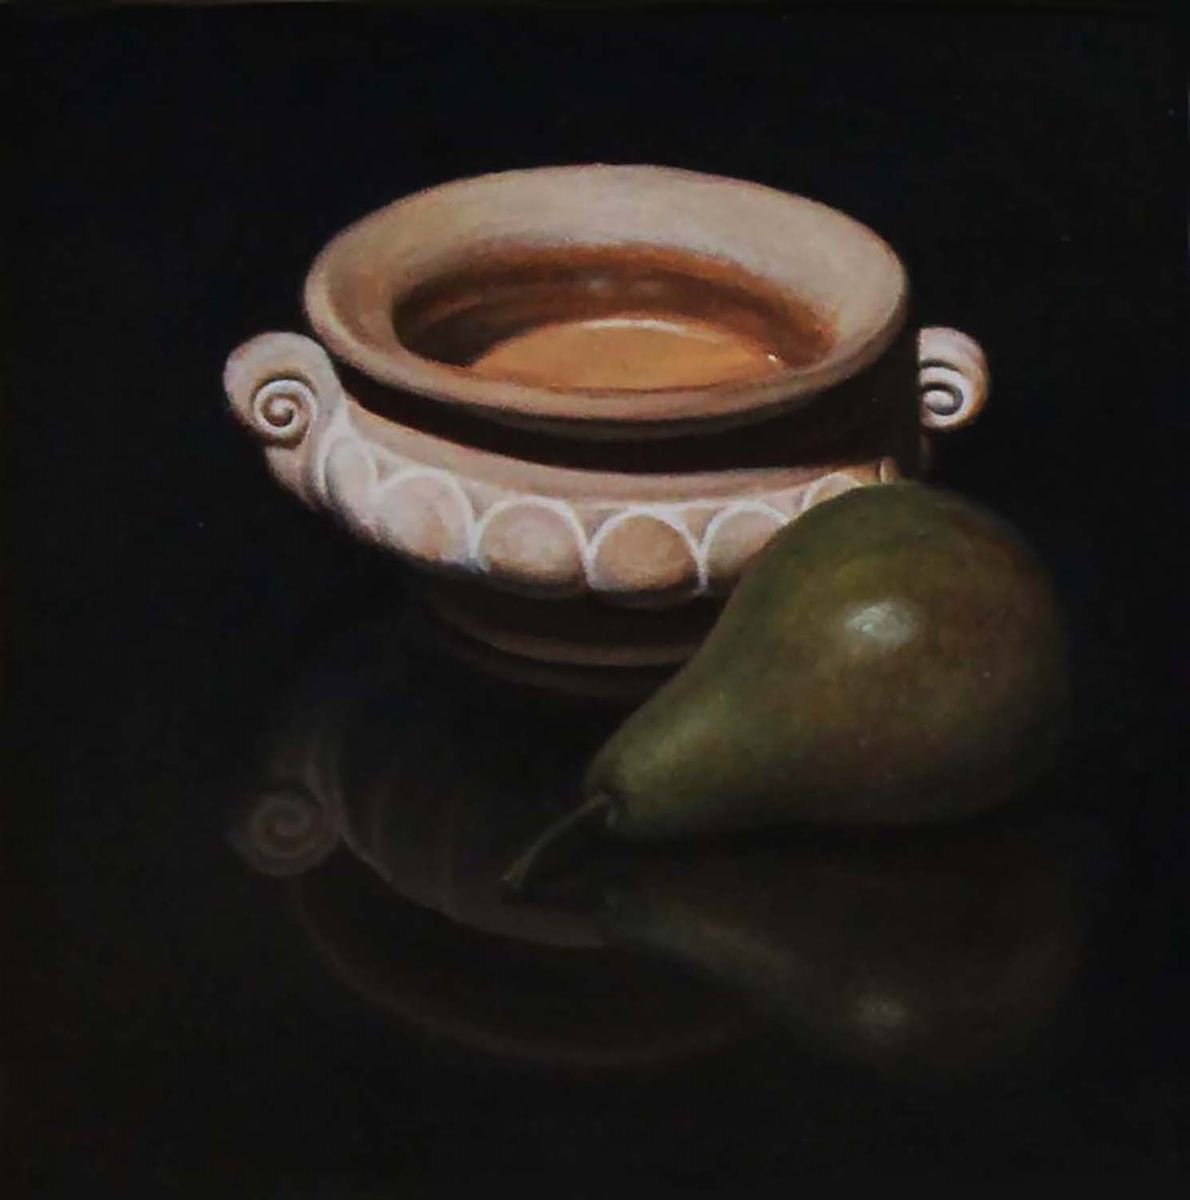 A Jar and a Pear by James Zhao